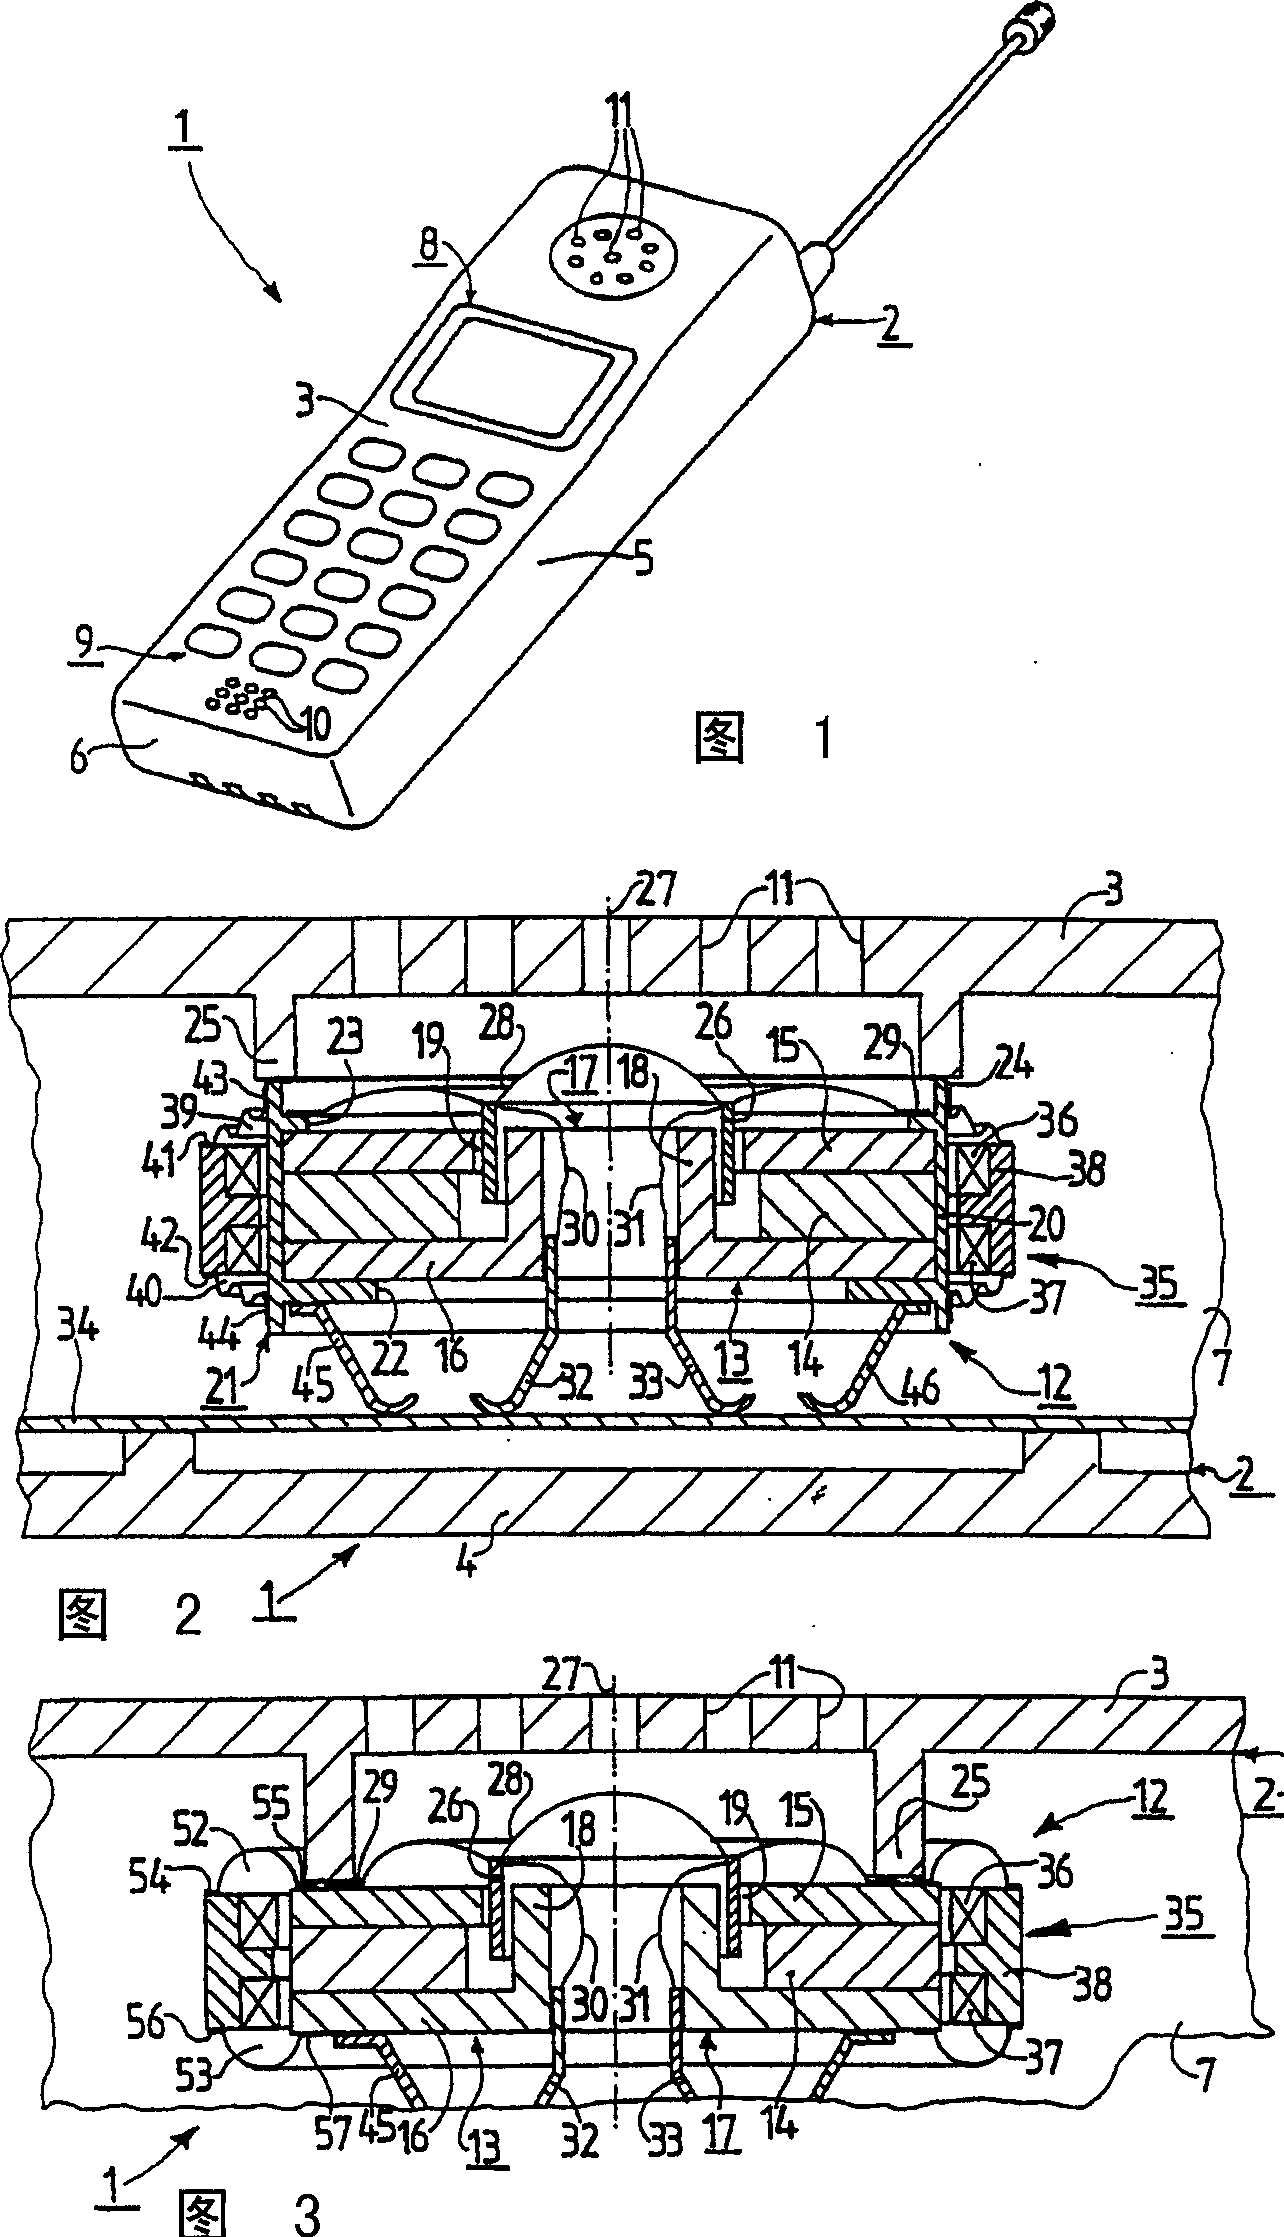 Apparatus having an electroacoustic transducer forming sound reproducing means and part of vibration generating means